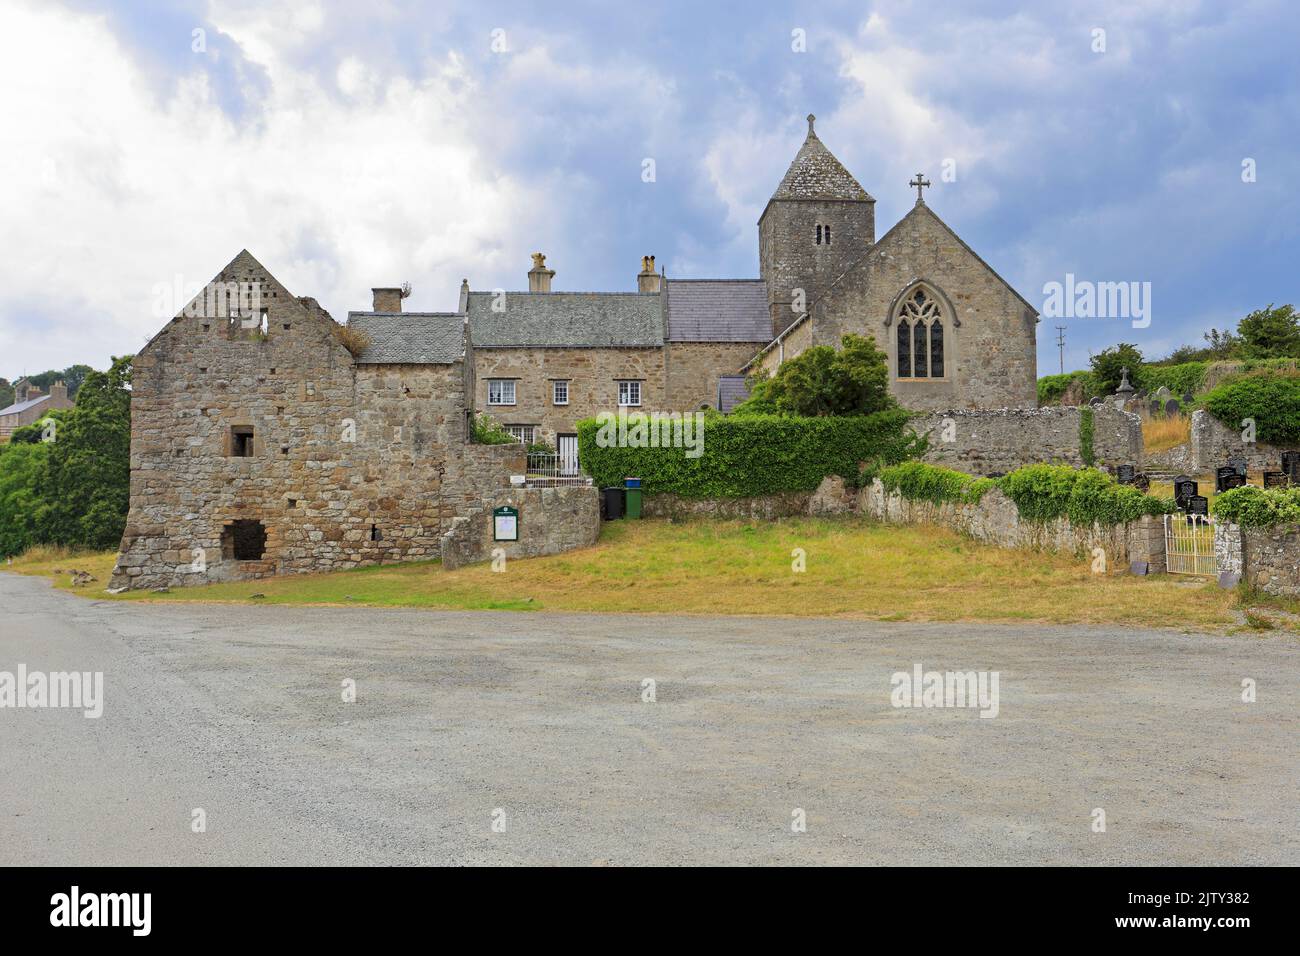 Penmon Priory on the Wales Cost Path, Penmon near Beaumaris, Isle of Anglesey, Ynys Mon, North Wales, UK. Stock Photo